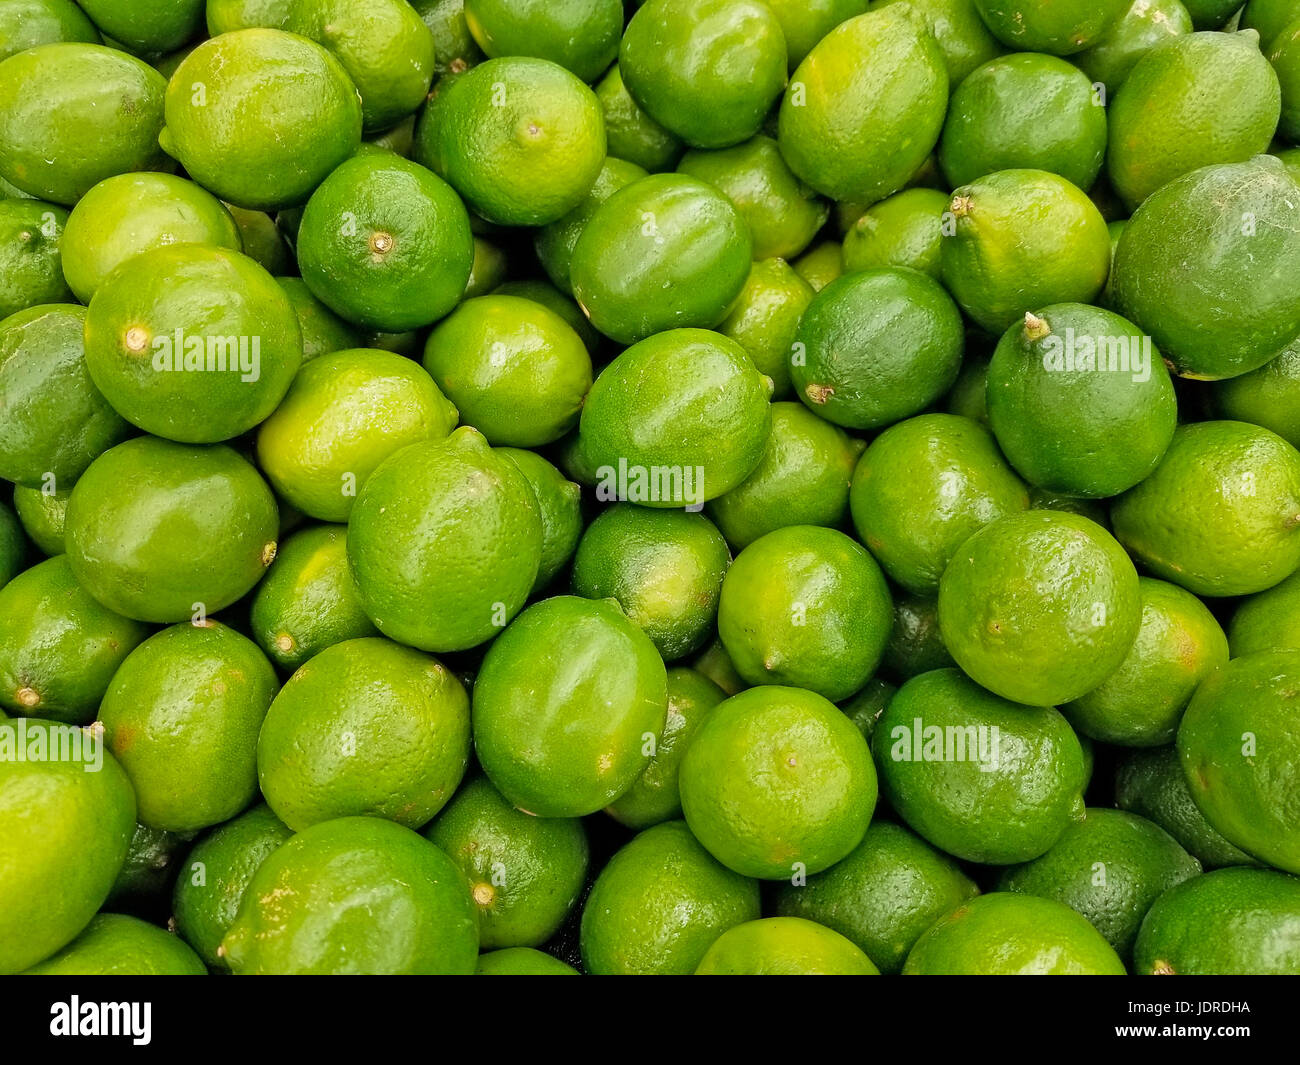 whole limes display in produce aisle Stock Photo